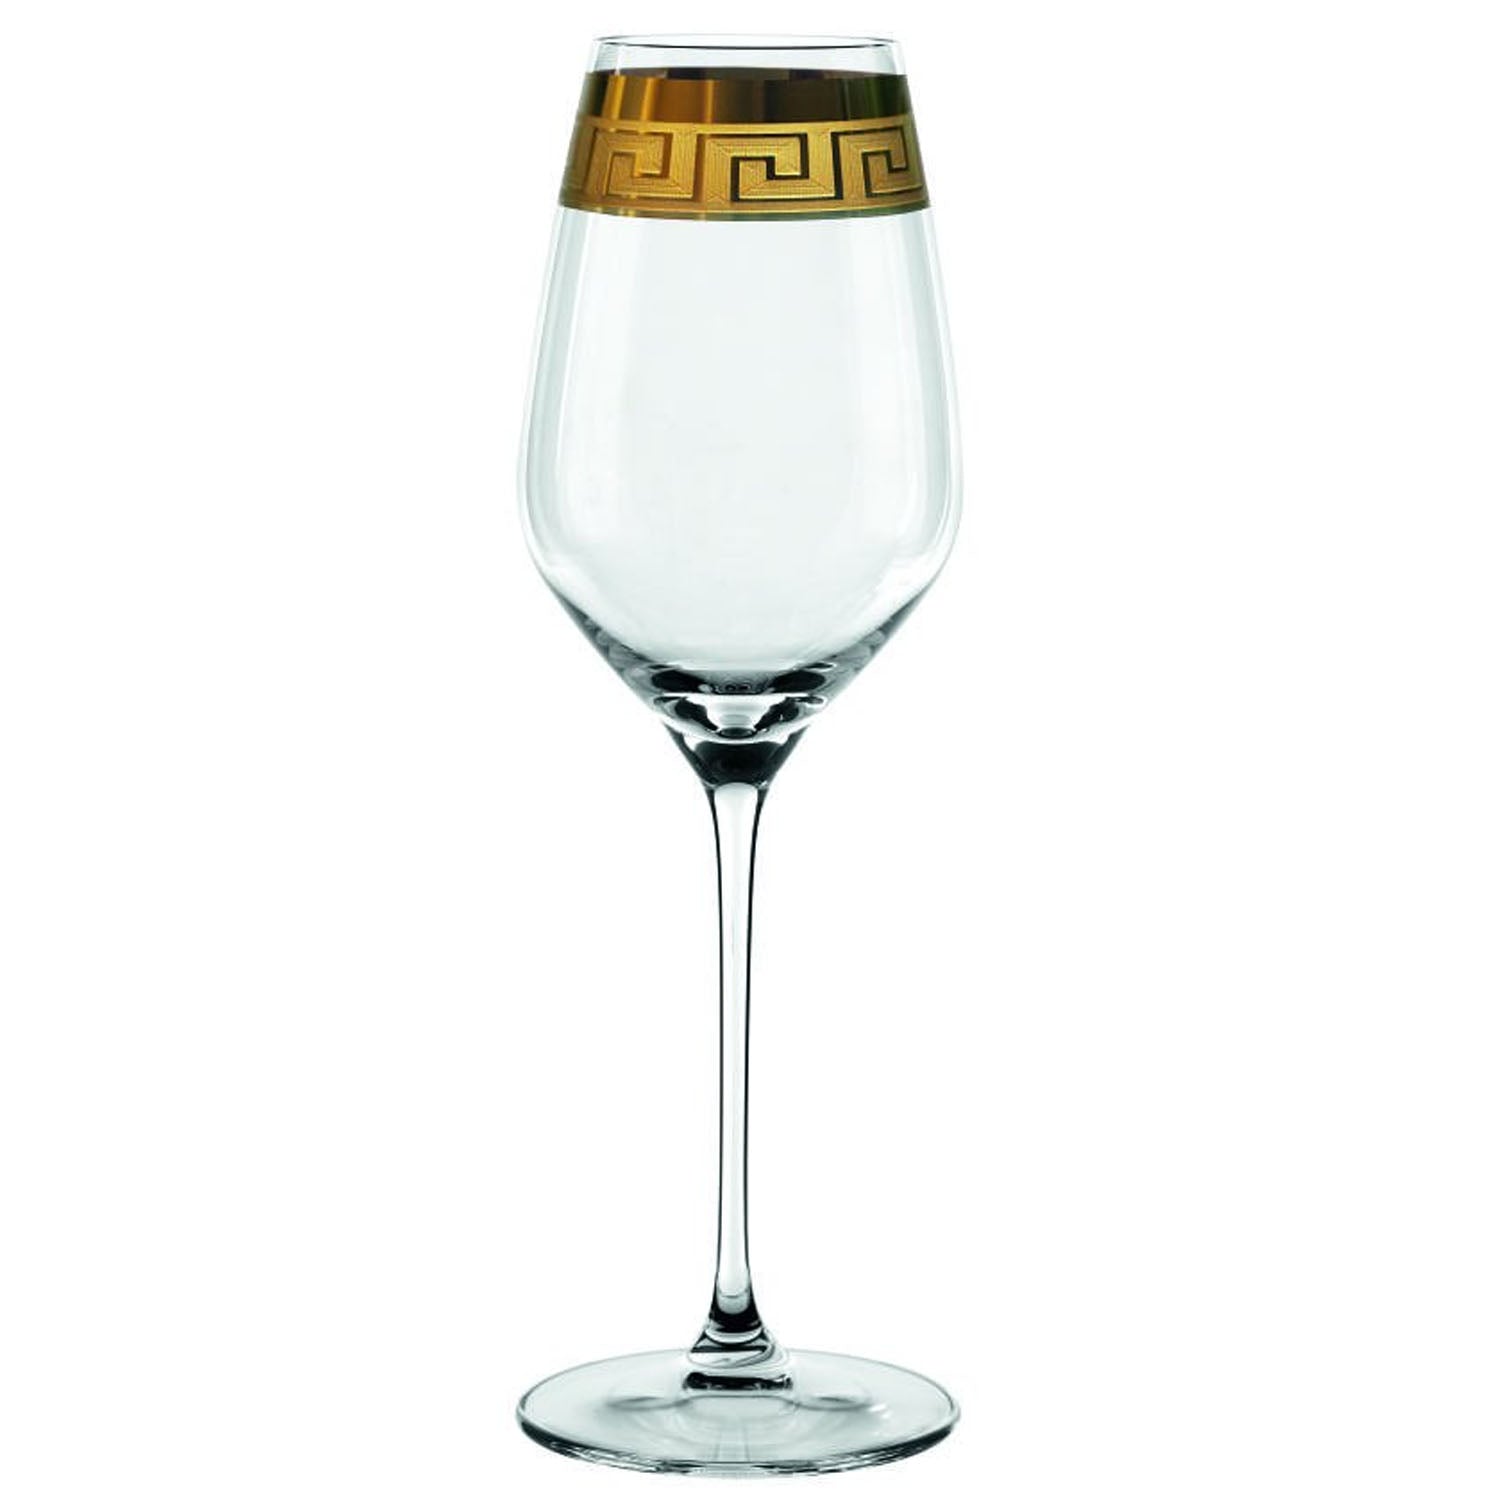 Muse Modern Champagne Flute + Reviews